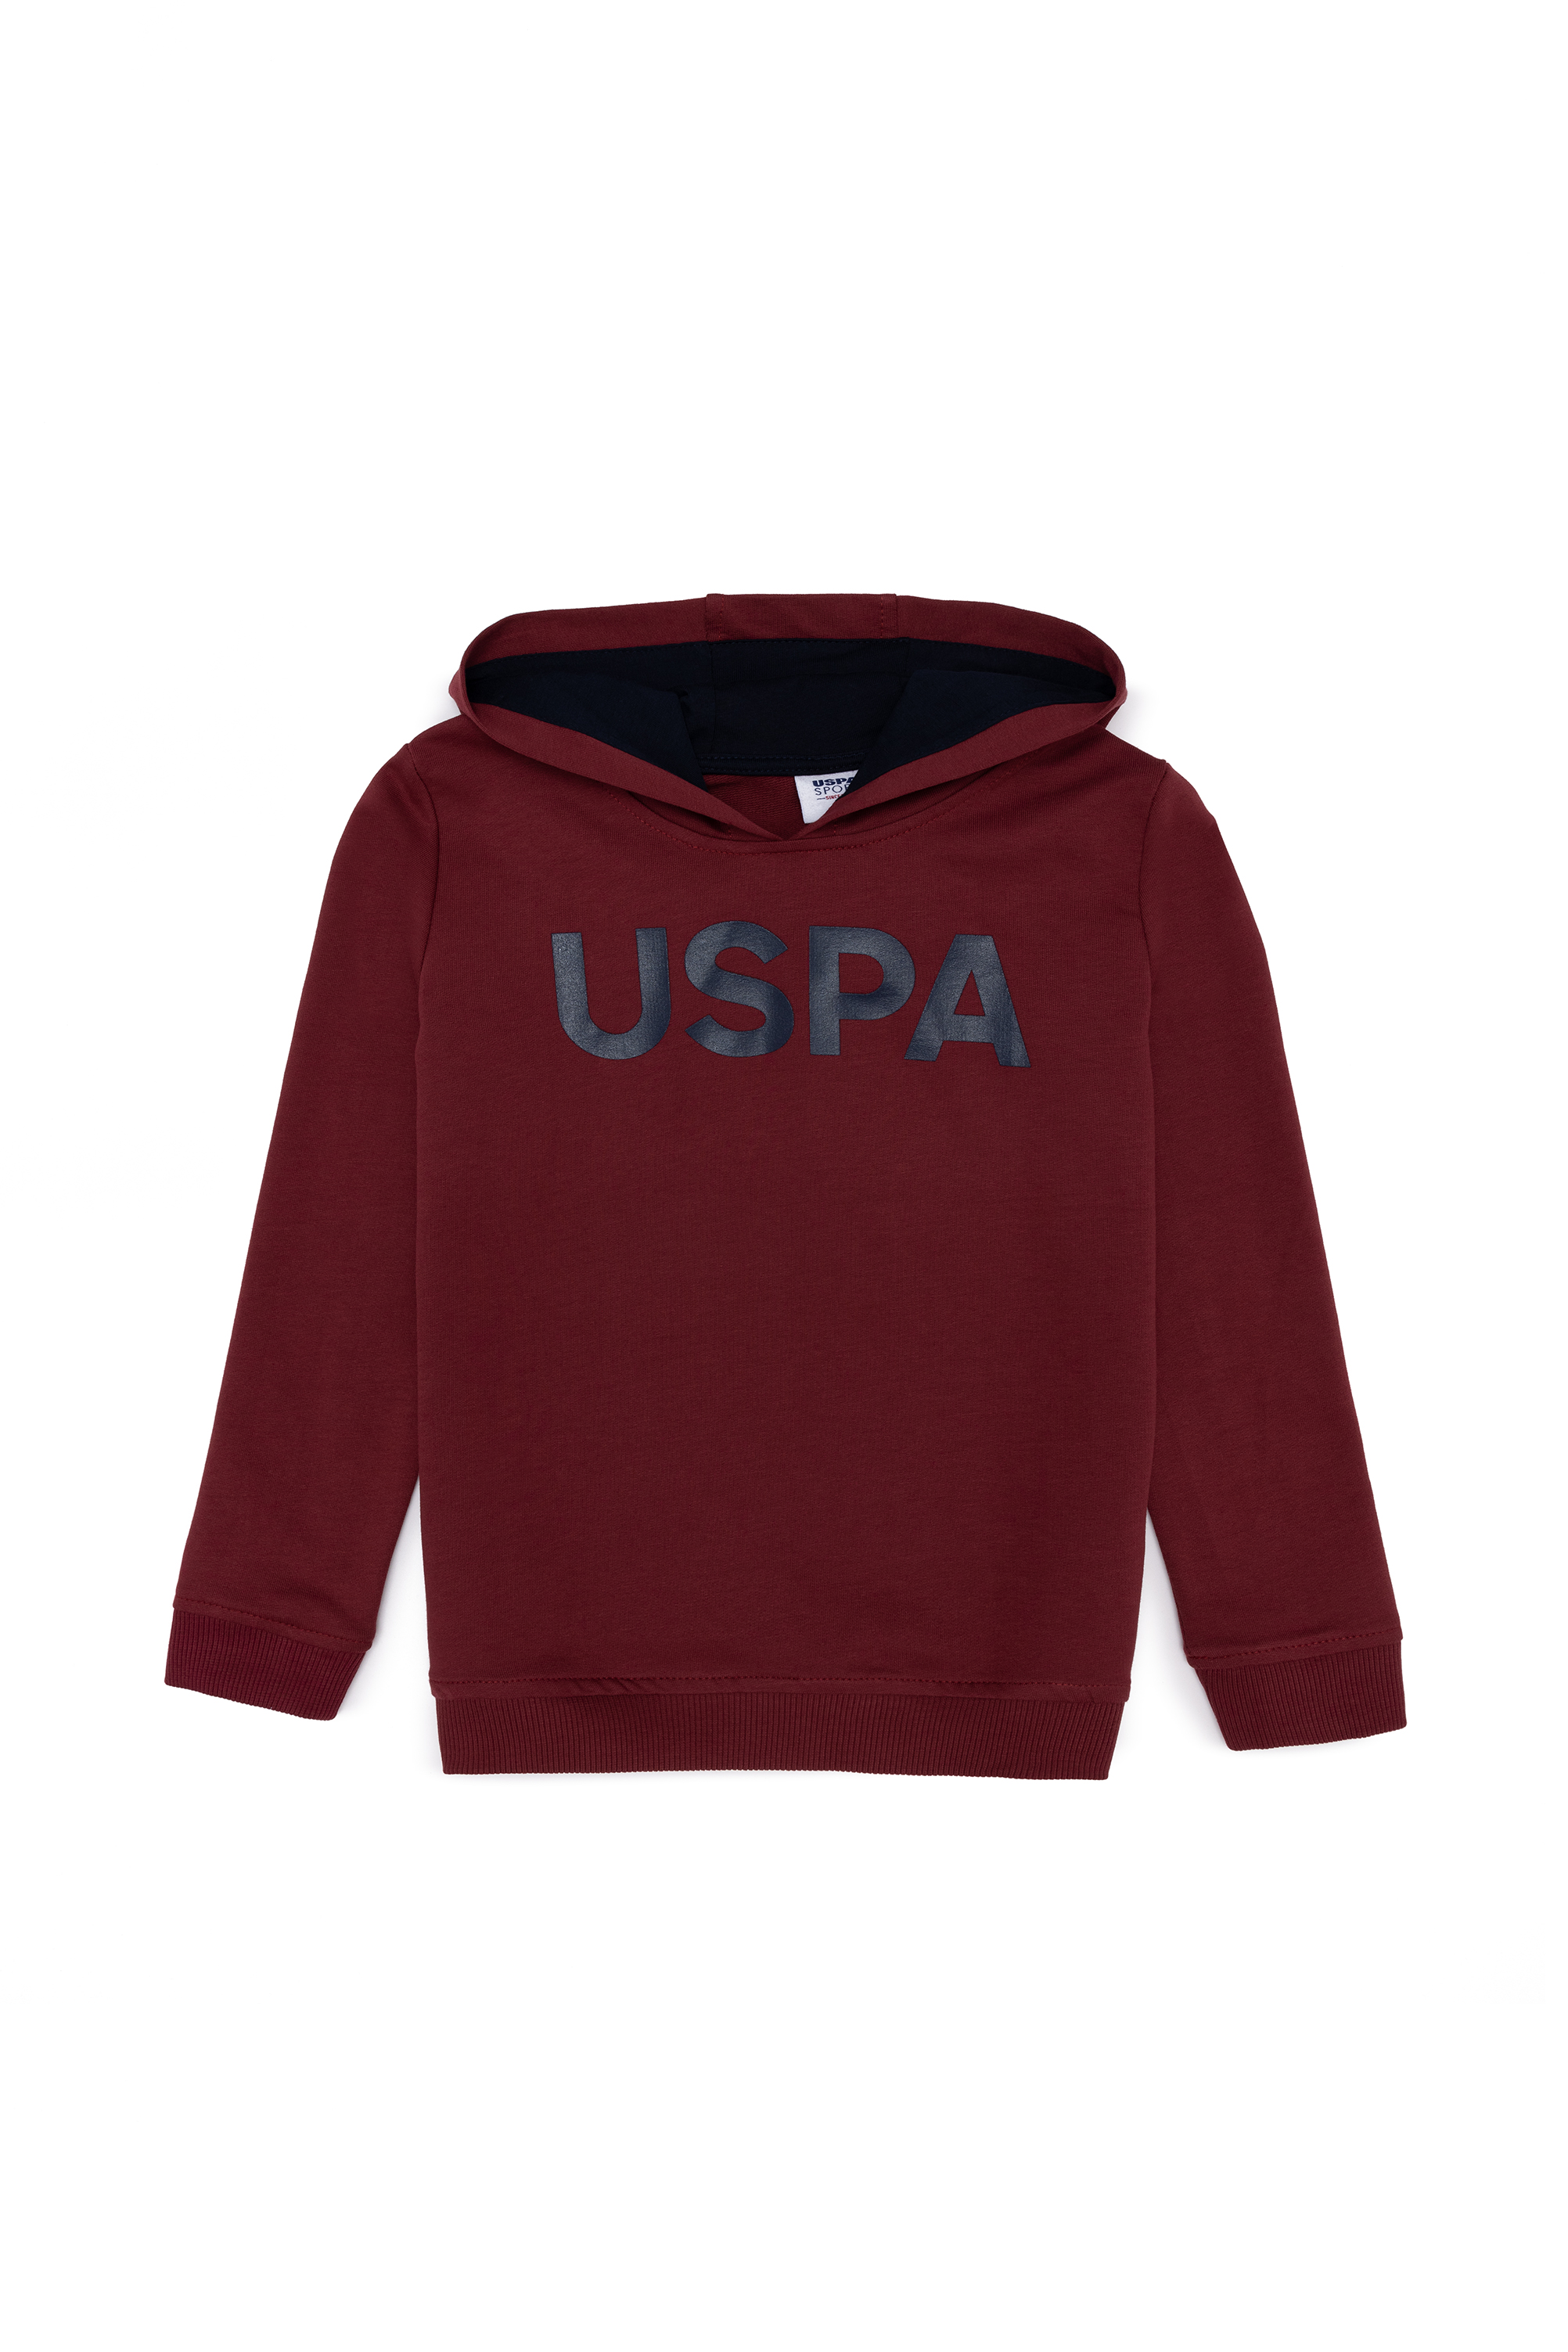 US Polo Assn Kids Hoodie G083SZ0820AMATASK022 in Burgundy, Size 134